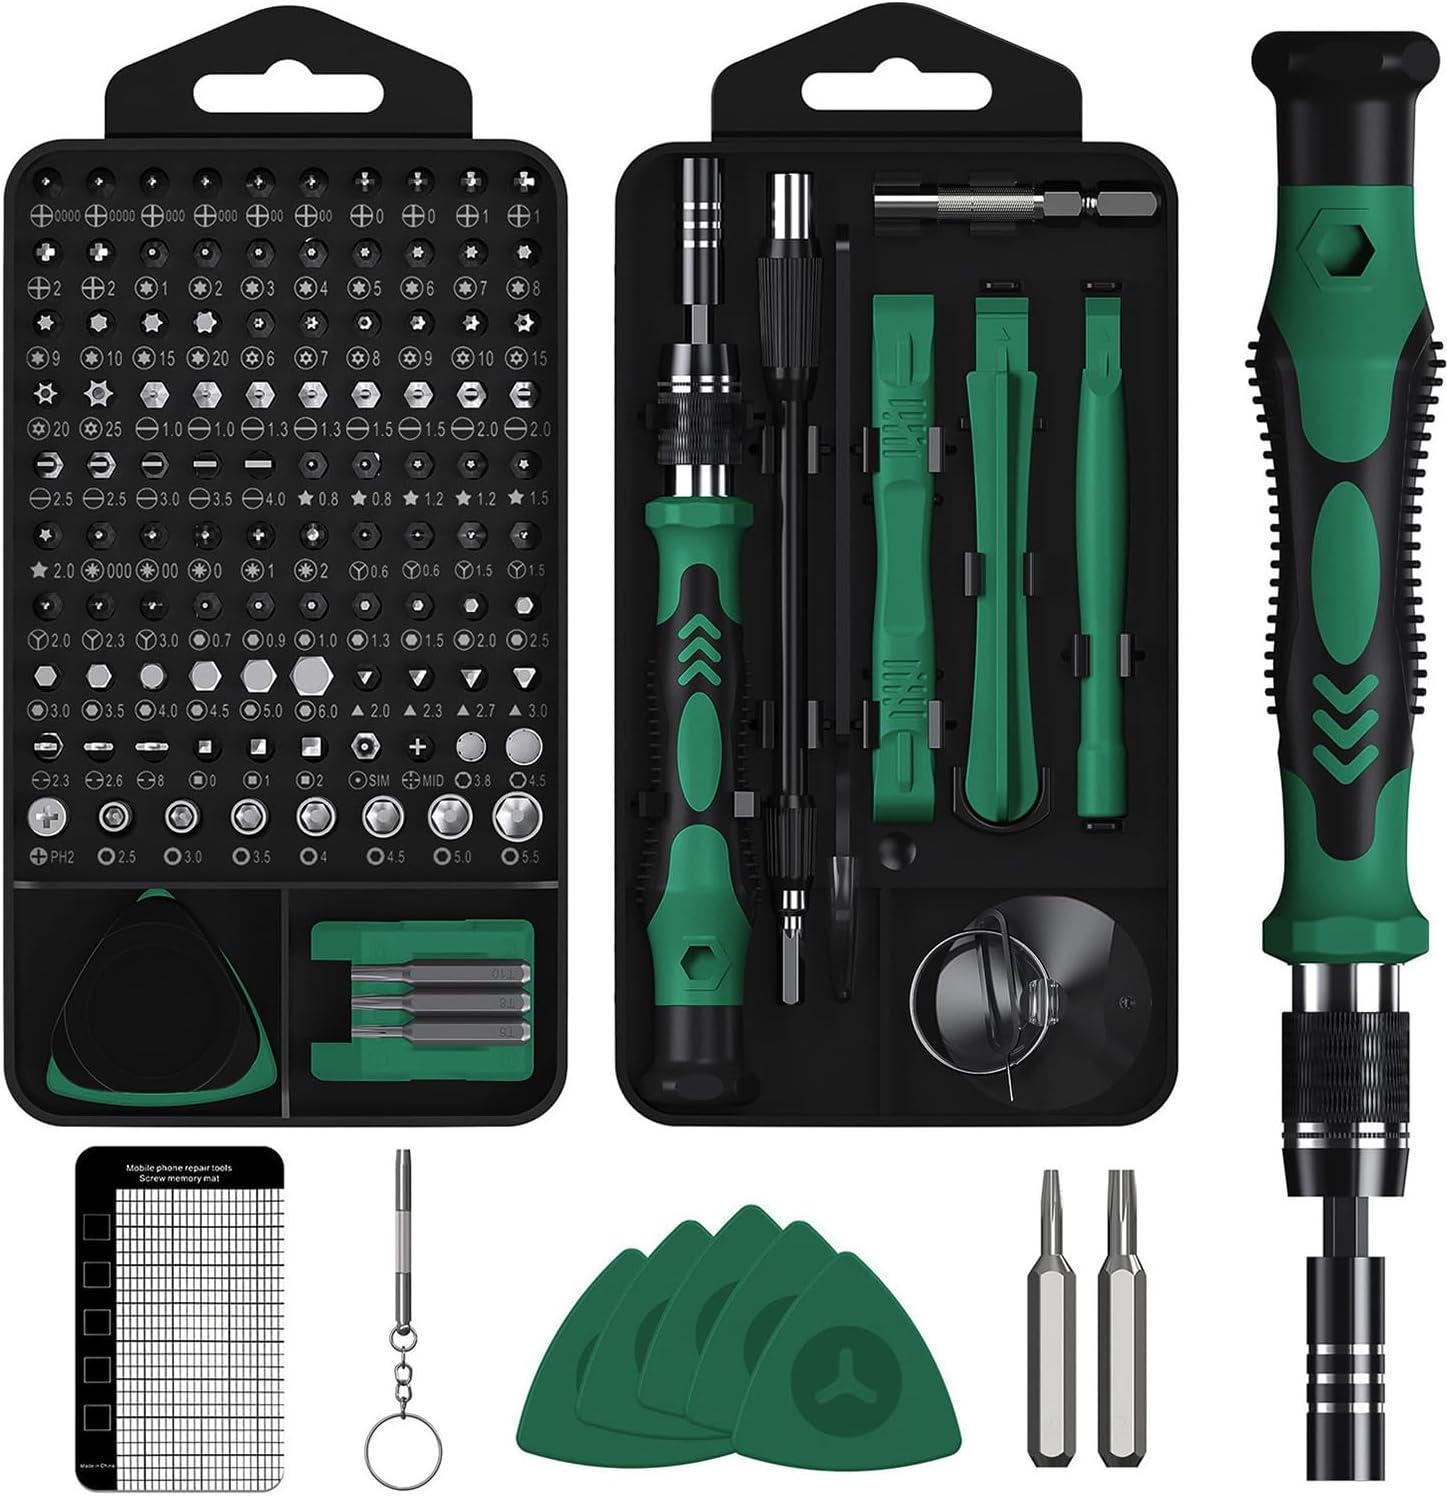 Anspect Precision Screwdrive130 in 1 with 120 bits Magnetic Screwdriver Bit Kit